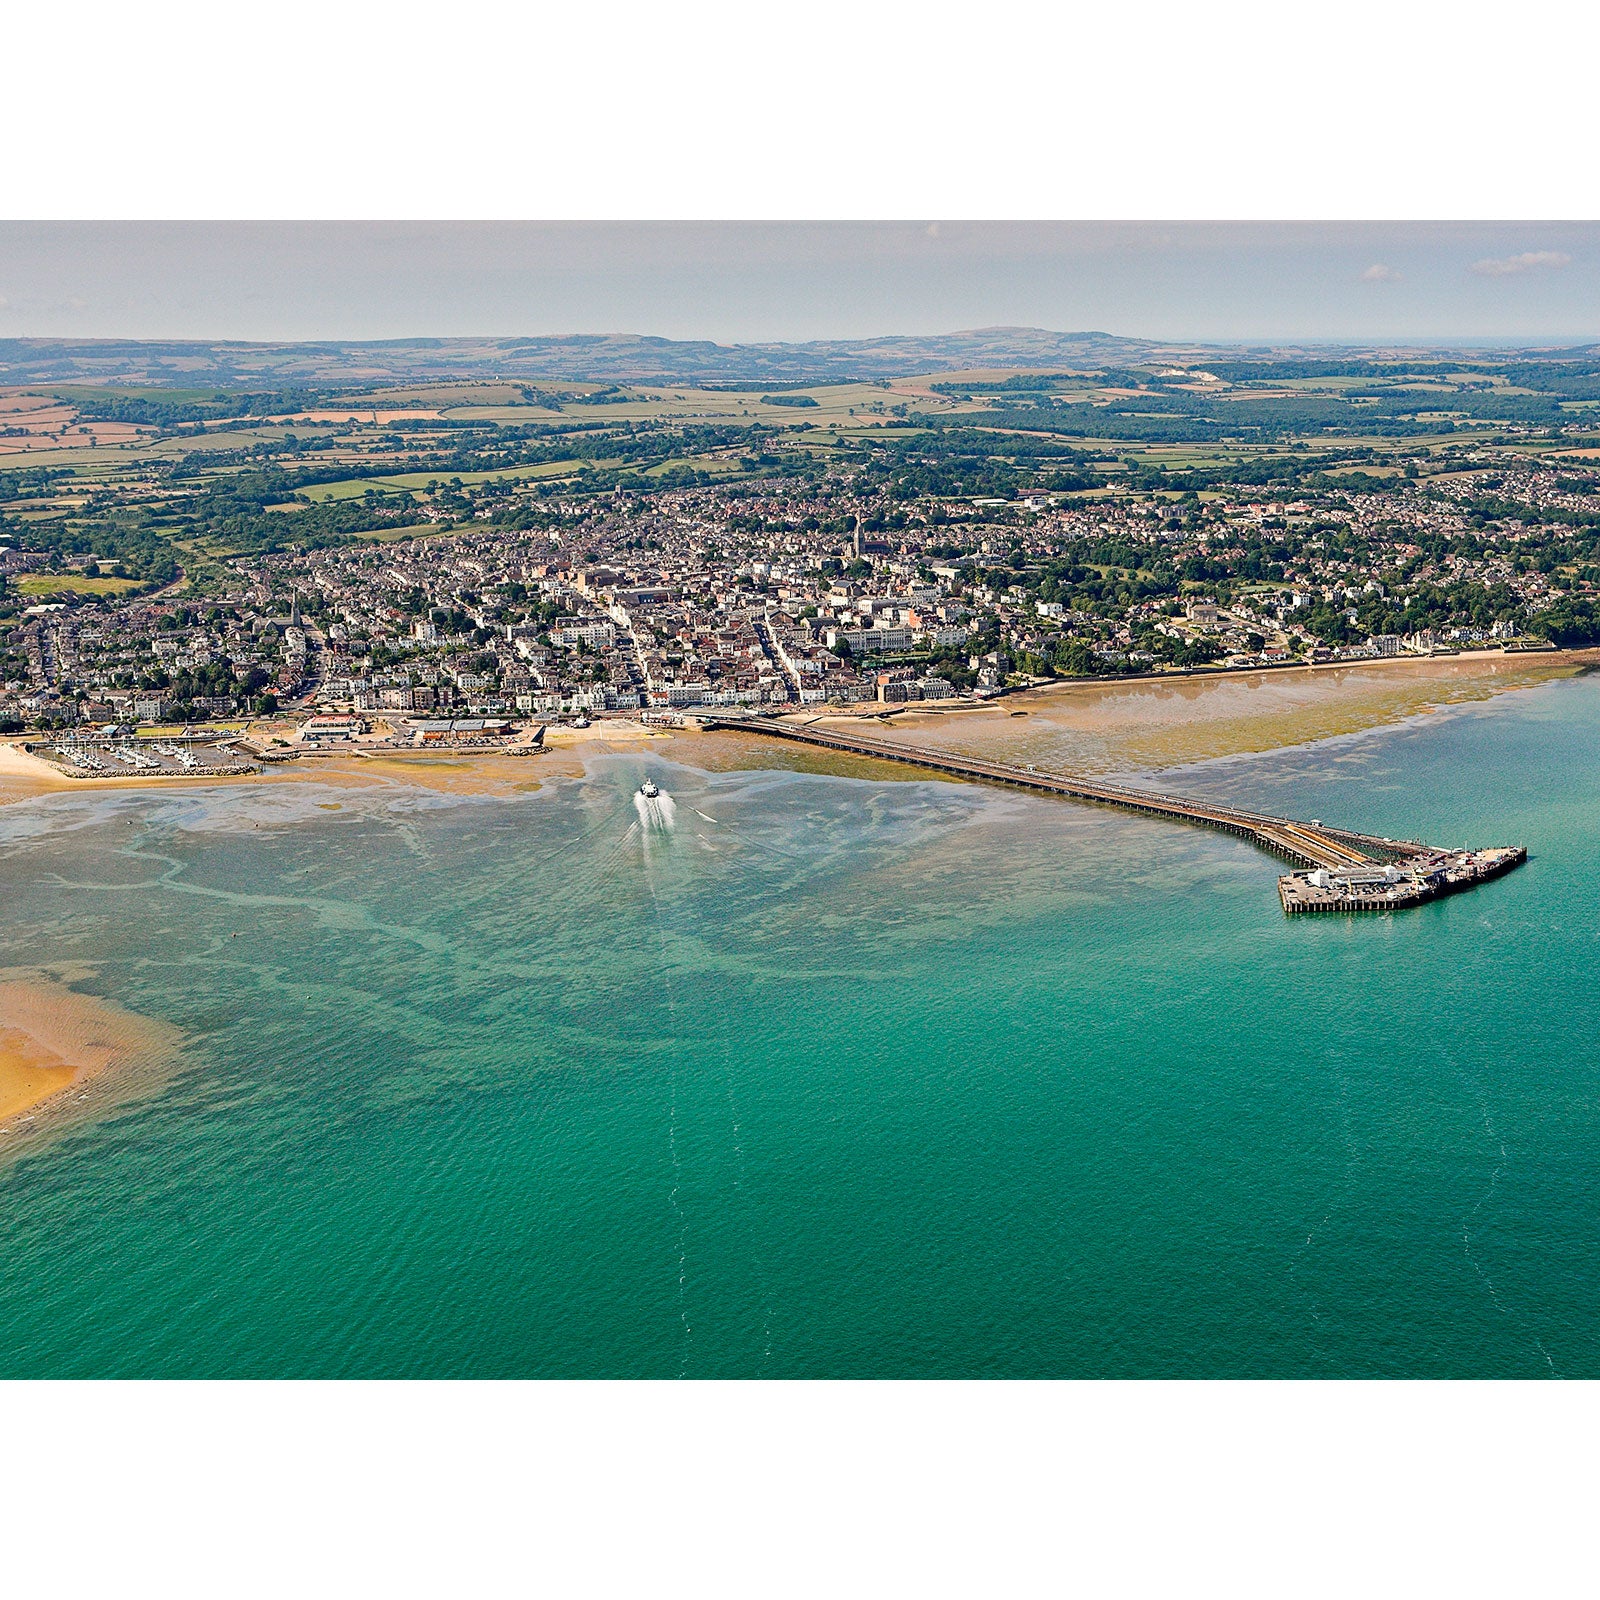 Aerial view of Ryde, a coastal town on the Isle with a pier, clear shallow waters, and surrounding greenery captured by Available Light Photography.